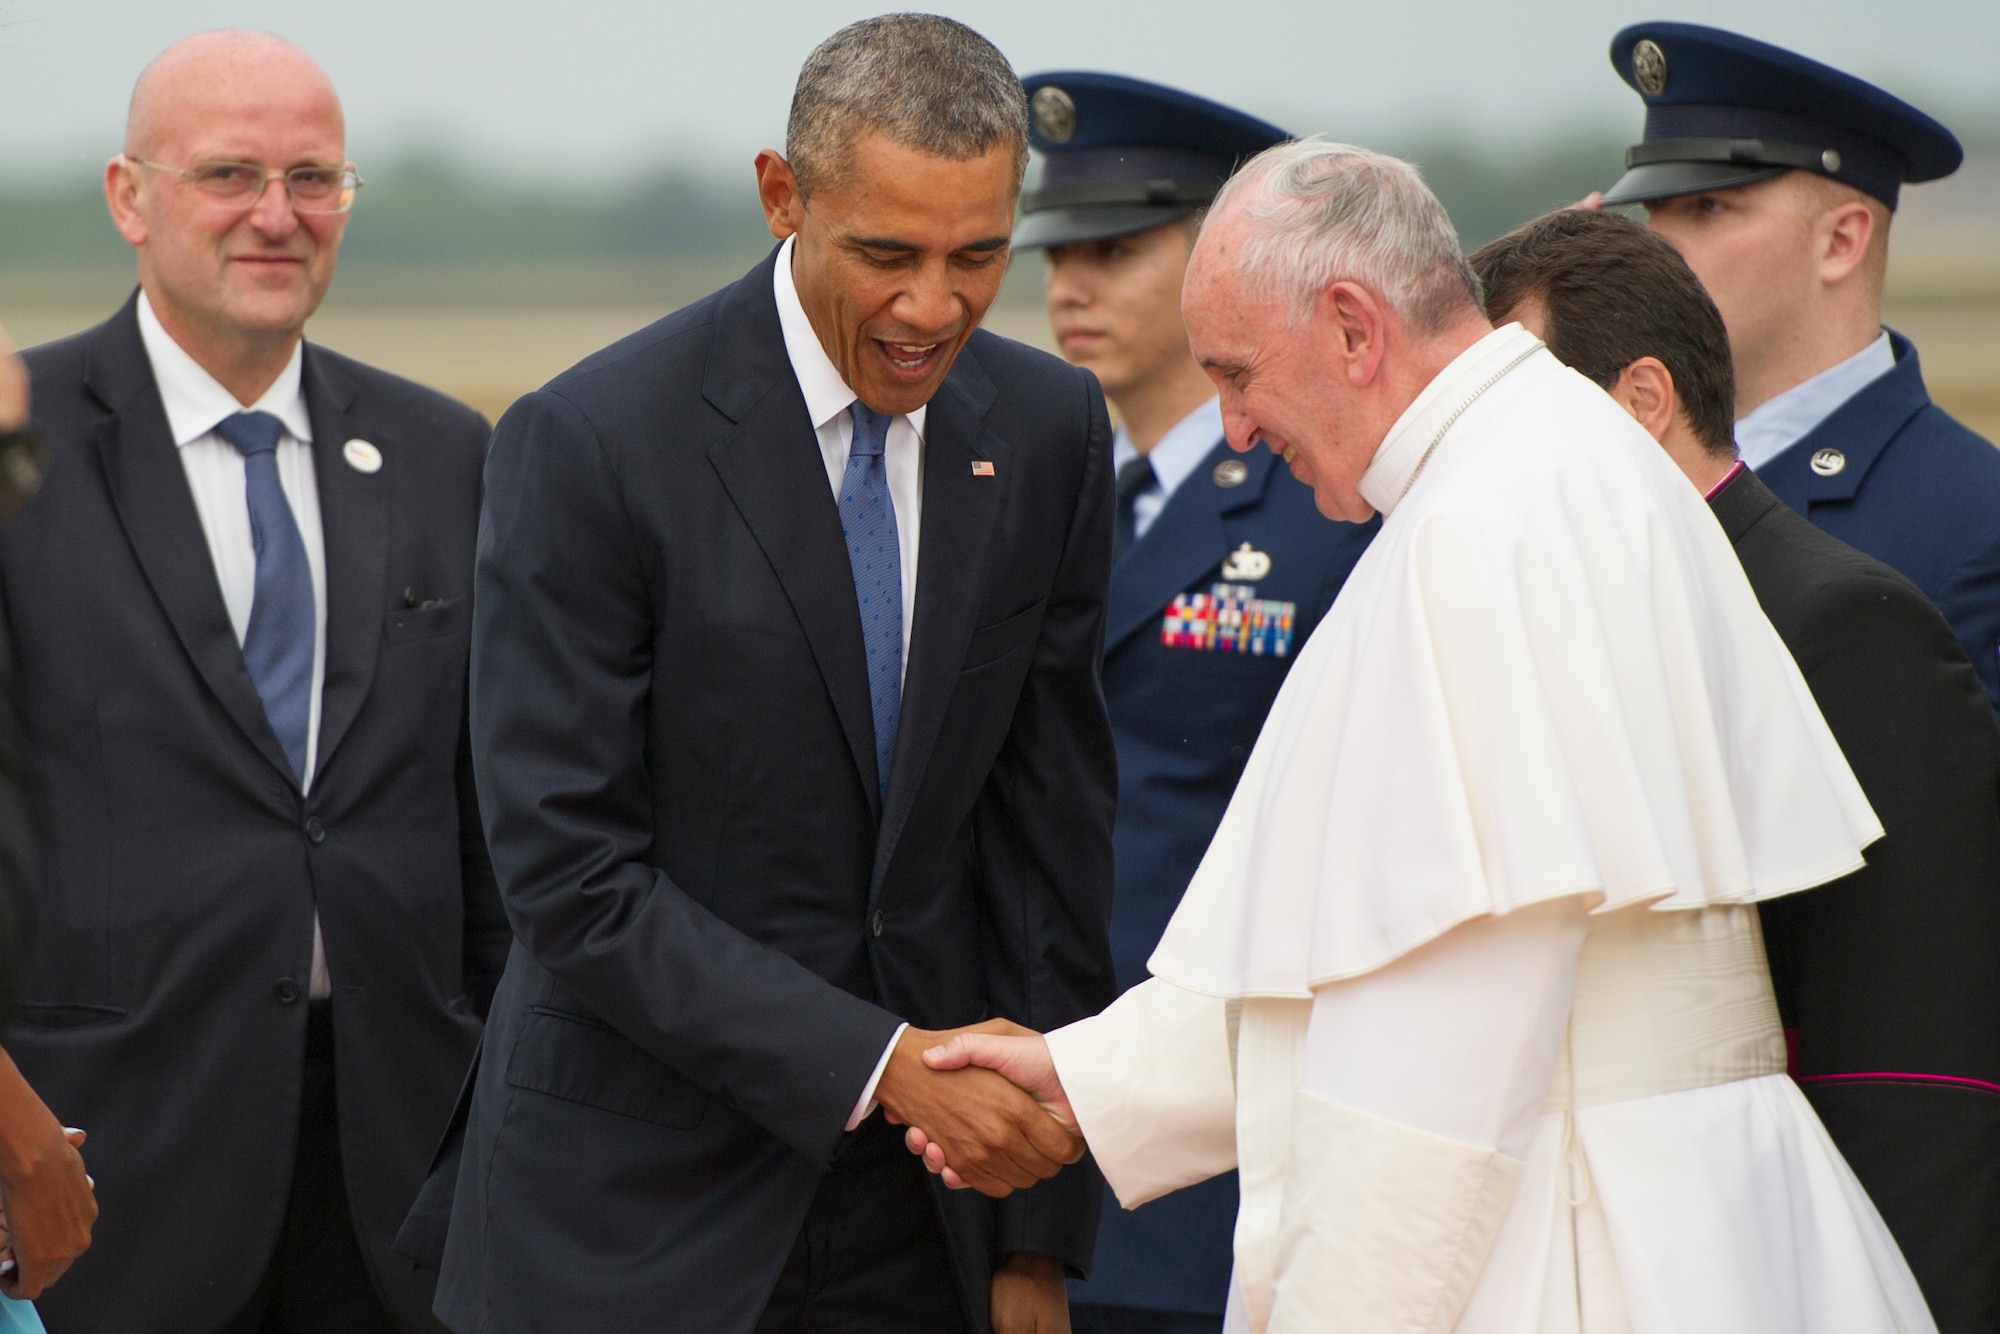 President Barack Obama greets Pope Francis at Joint Base Andrews, Md., Sept. 22, 2015. This marks the first visit by the current pope to the United States. (U.S. Air Force photo/Tech. Sgt. Robert Cloys)